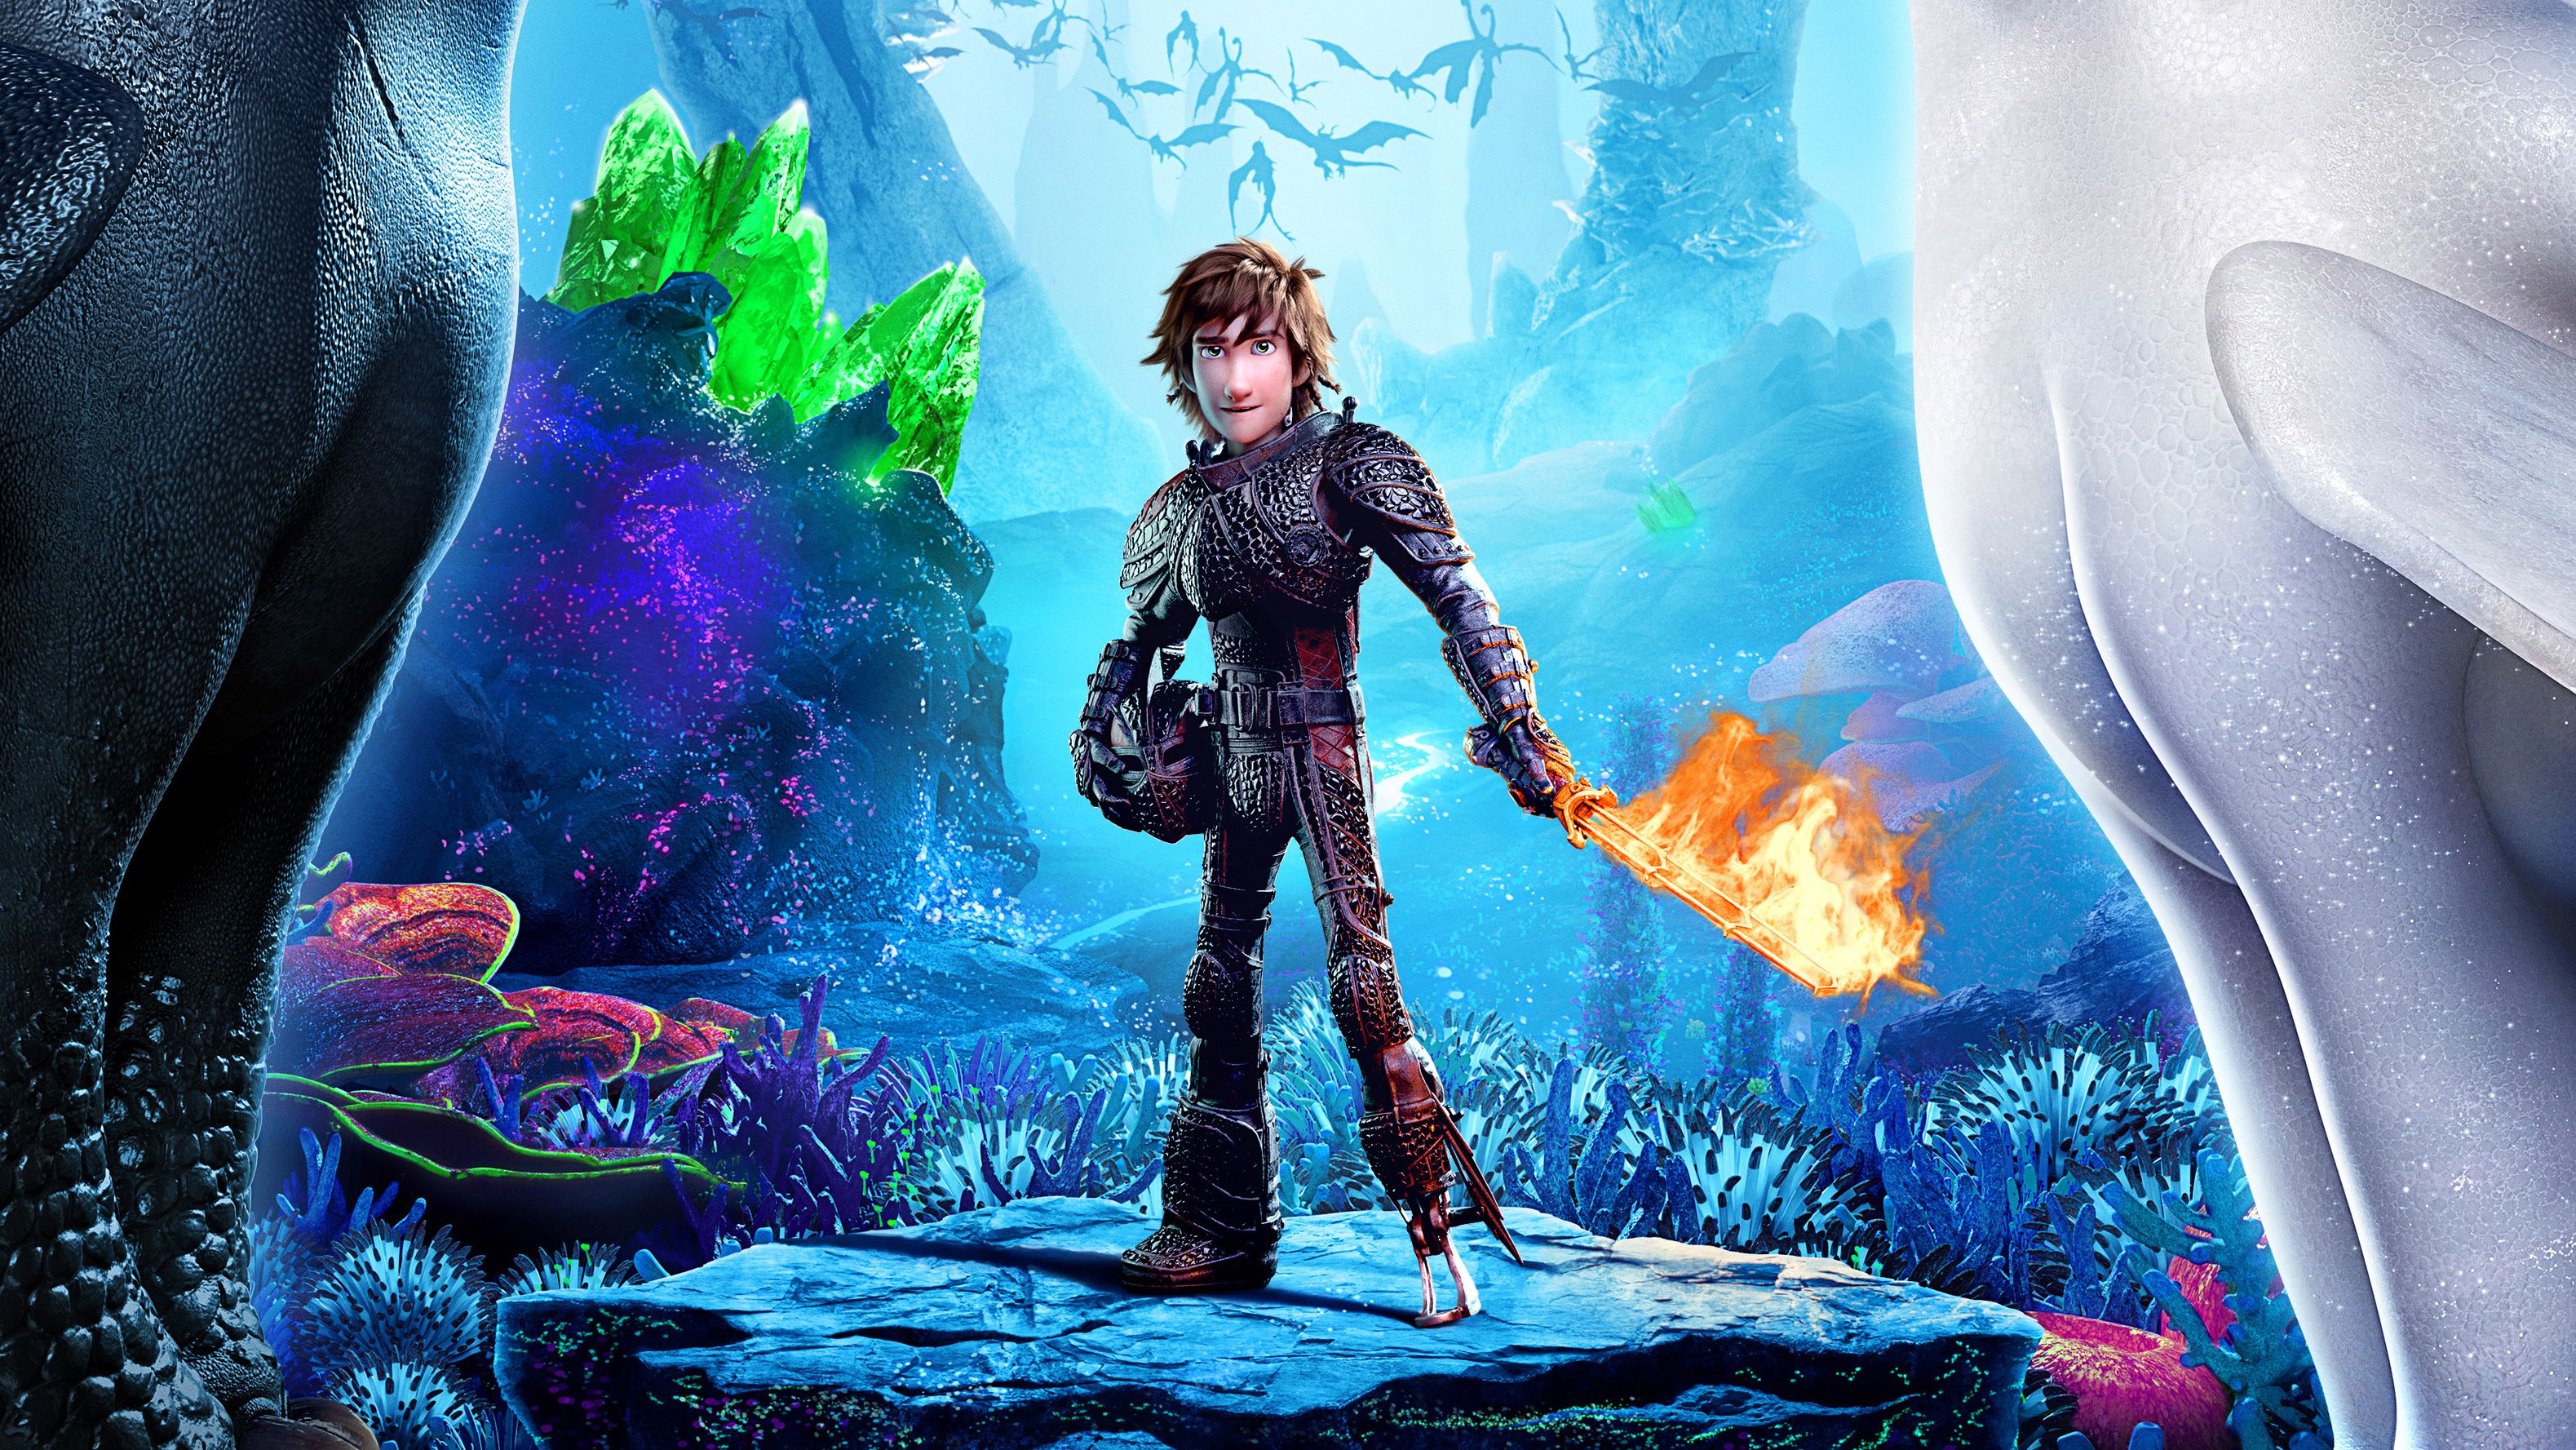 Hiccup How To Train Your Dragon 3 2019 4k, HD Movies, 4k